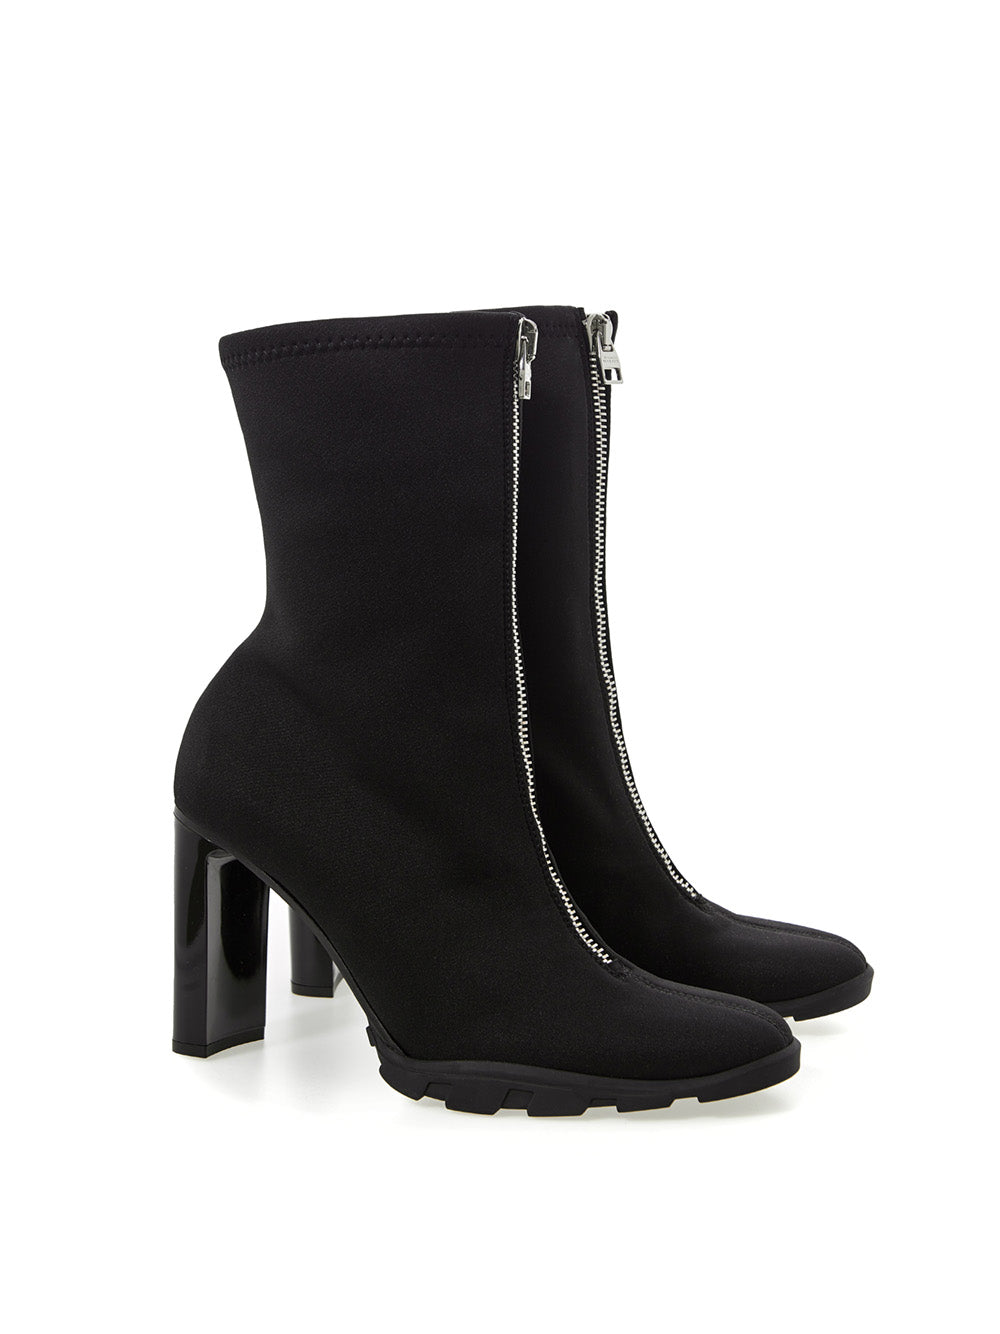 Slim Tread ankle boots by Alexander McQueen